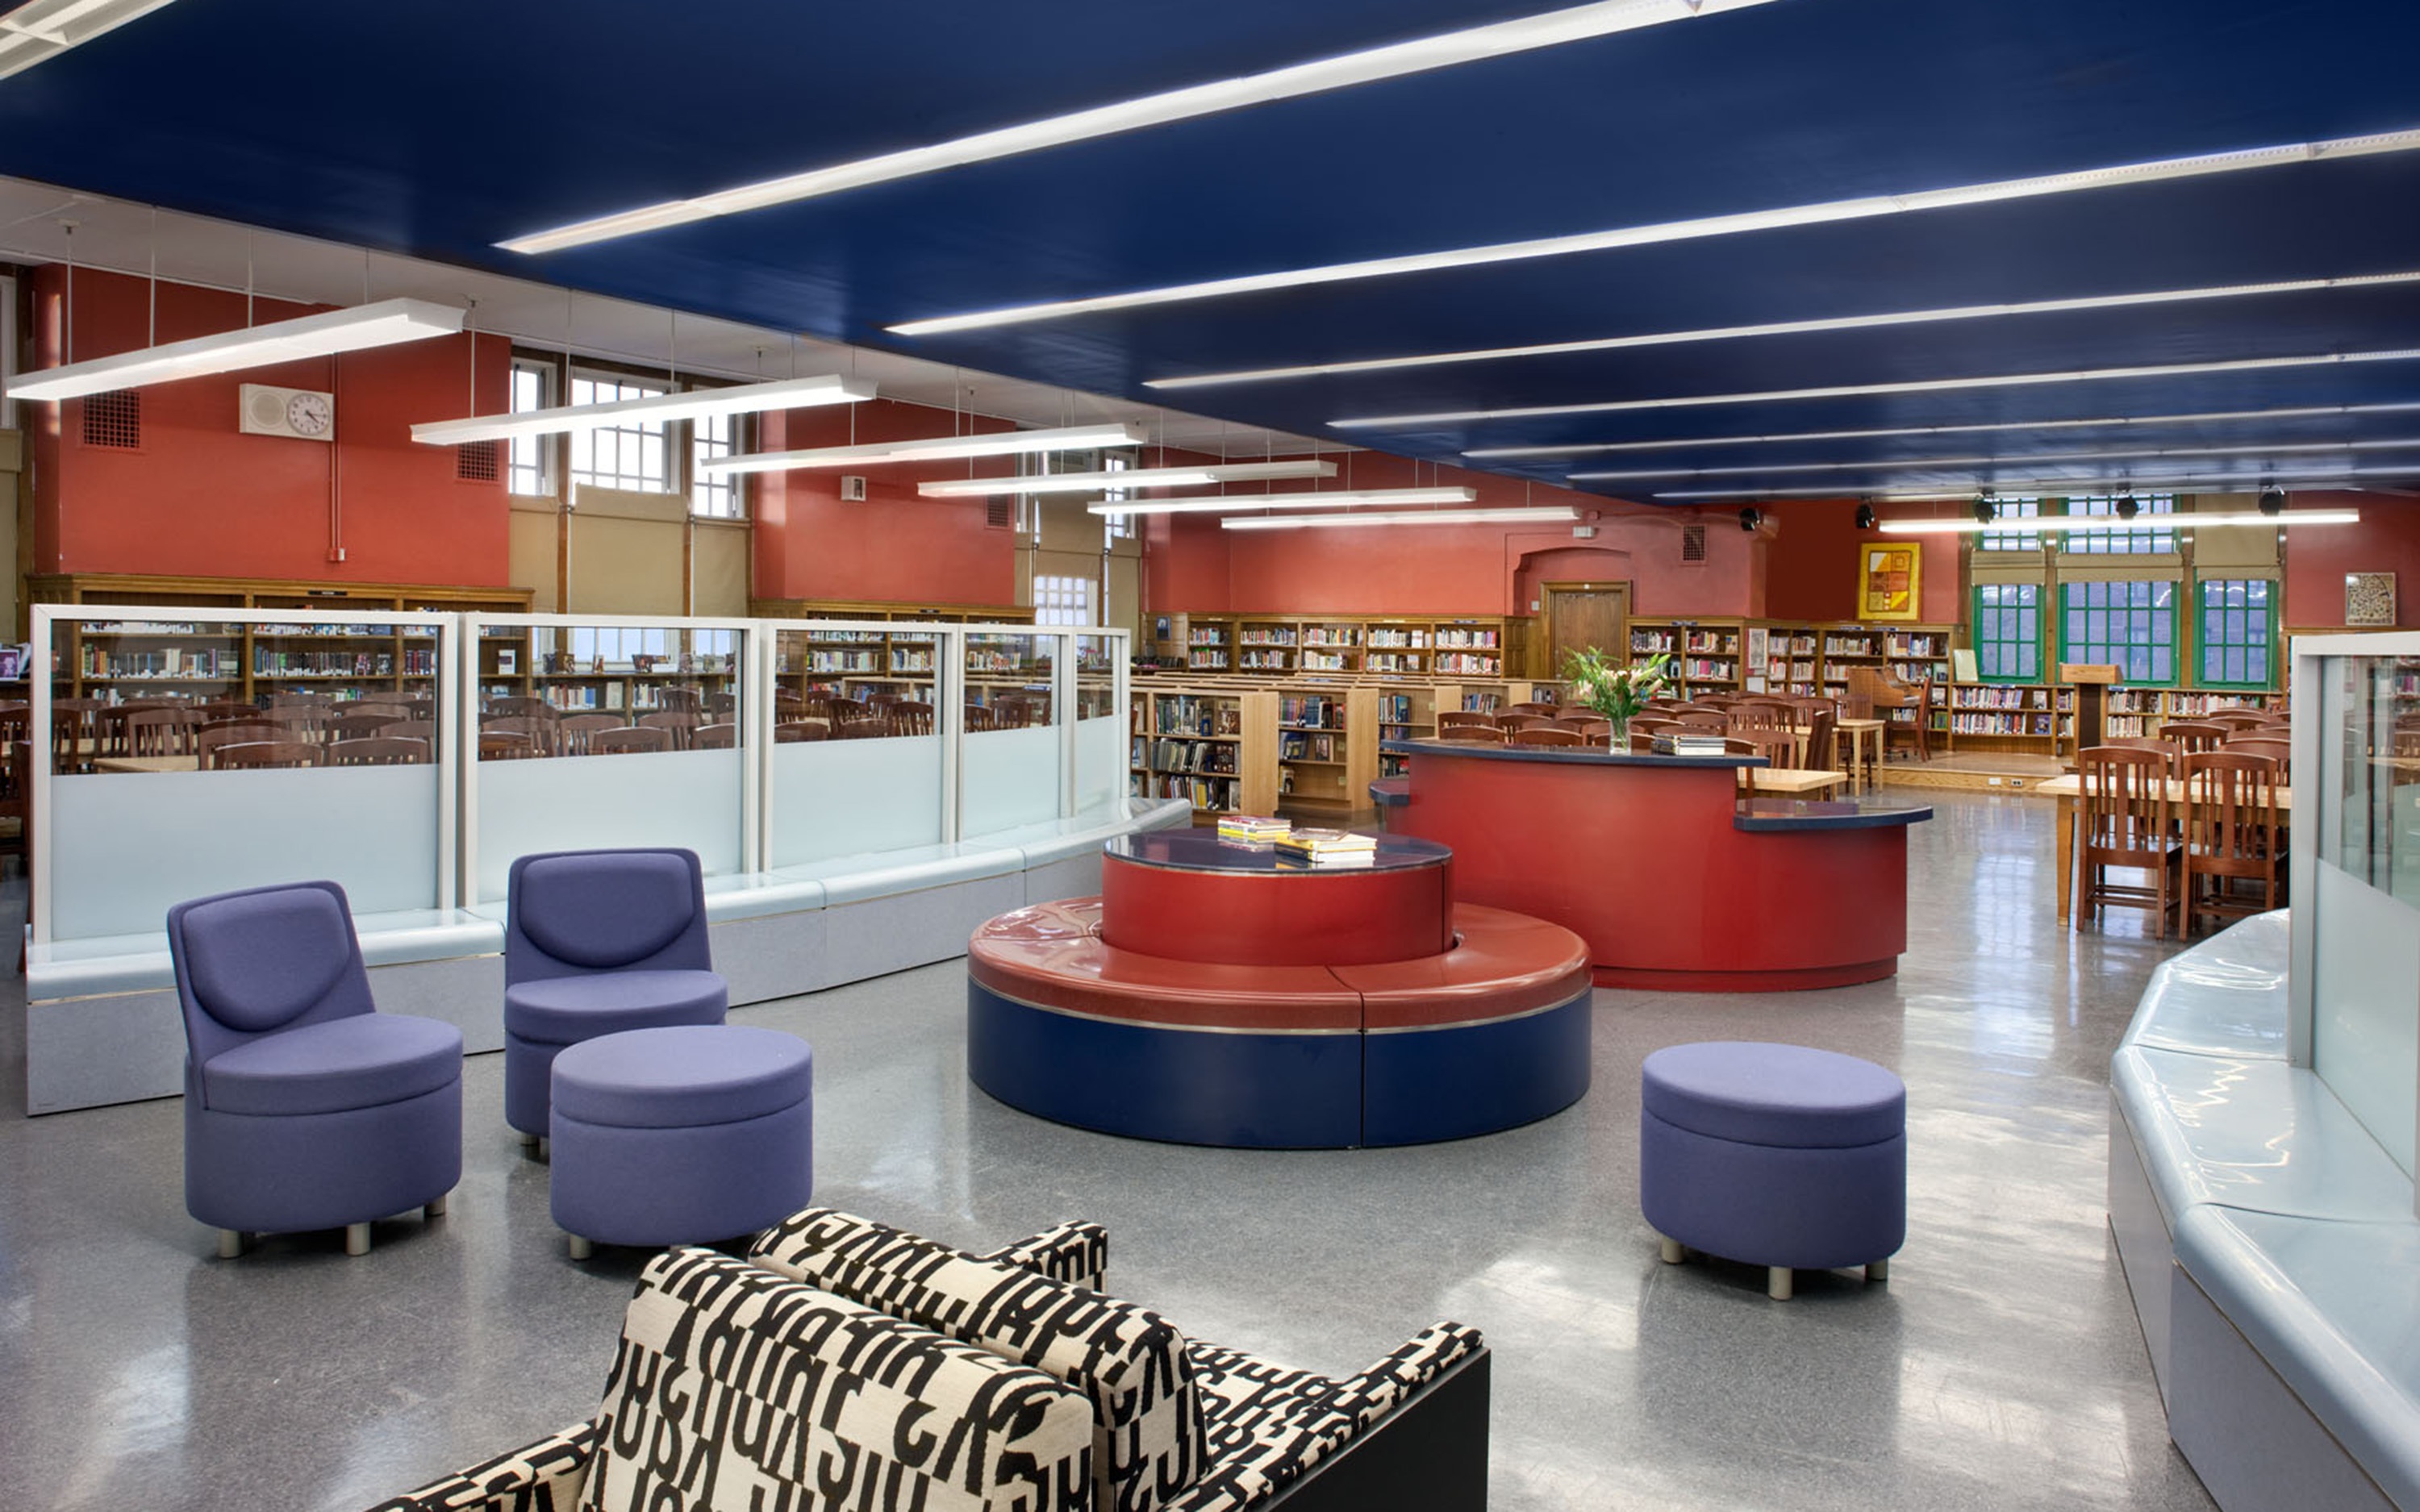 New Visions Public Libraries purple seating area and acoustic panels